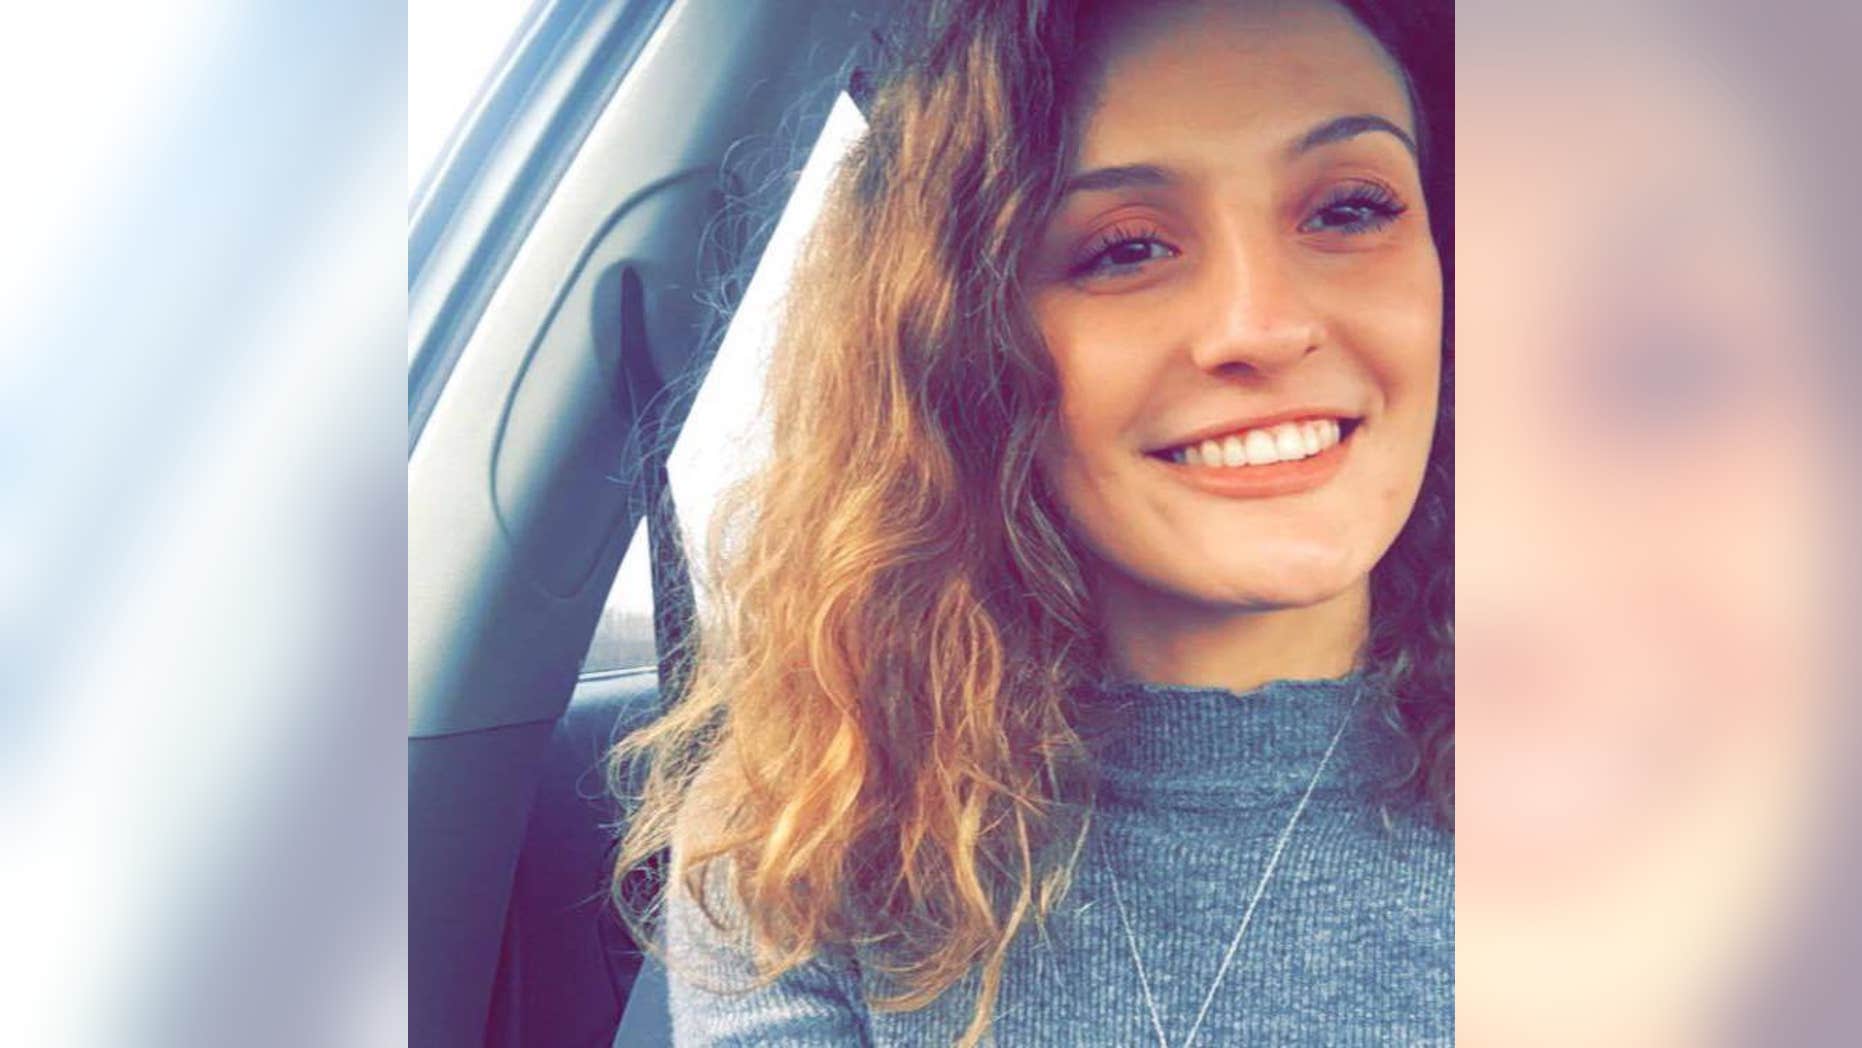 Illinois Woman 20 Who Abandoned Car And Vanished Died Of Hypothermia